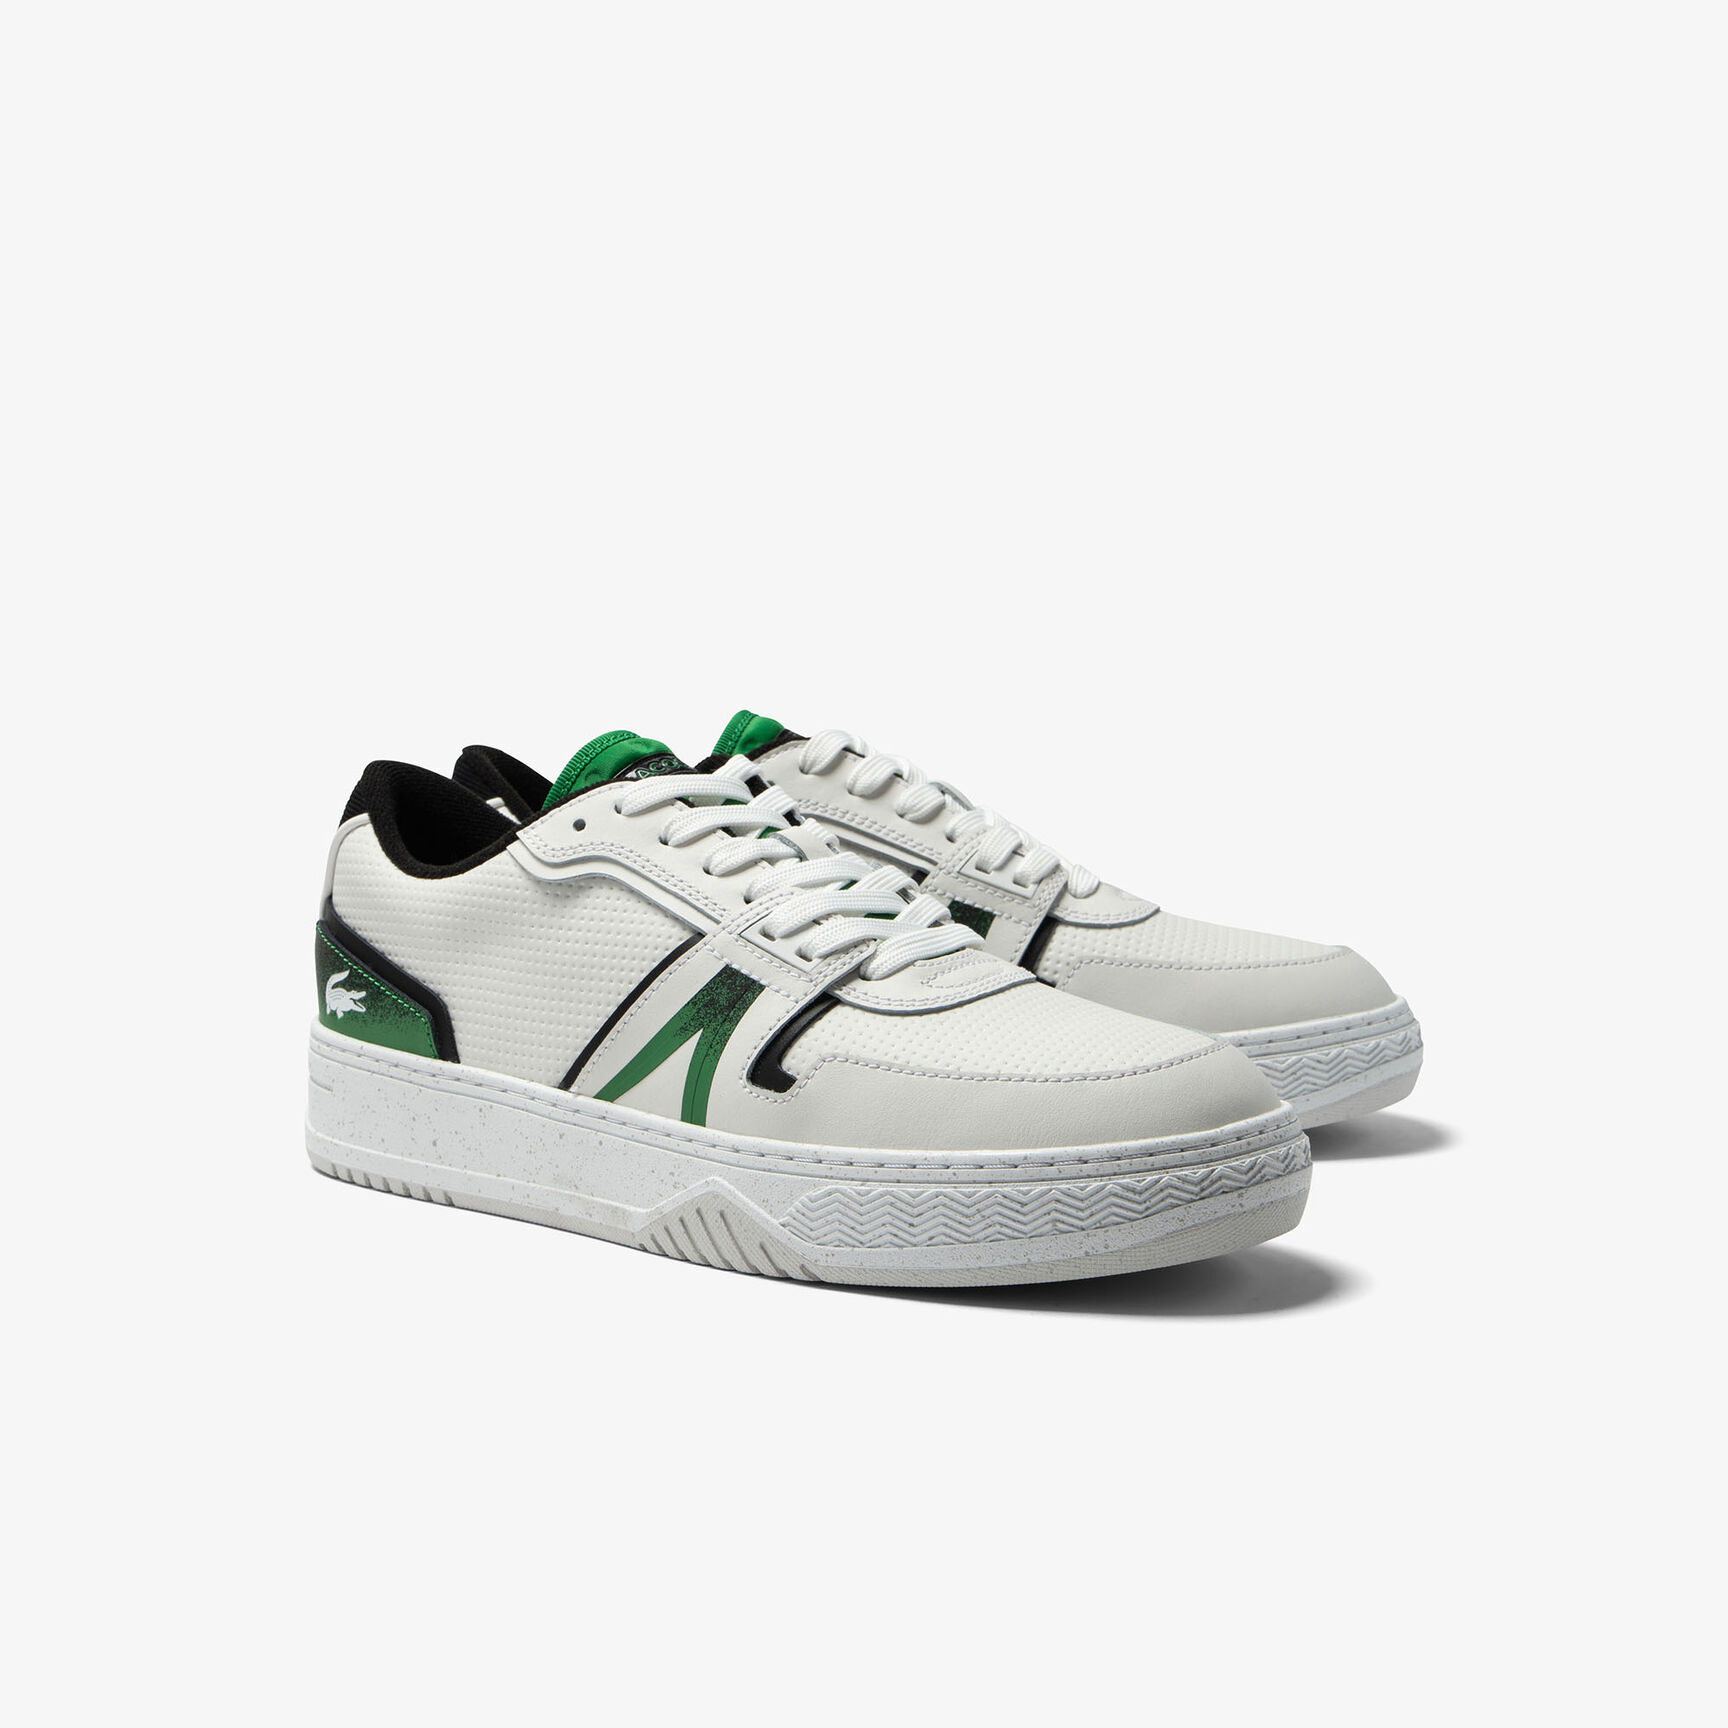 Buy Men's Lacoste L001 Leather Spray Print Trainers | Lacoste QA